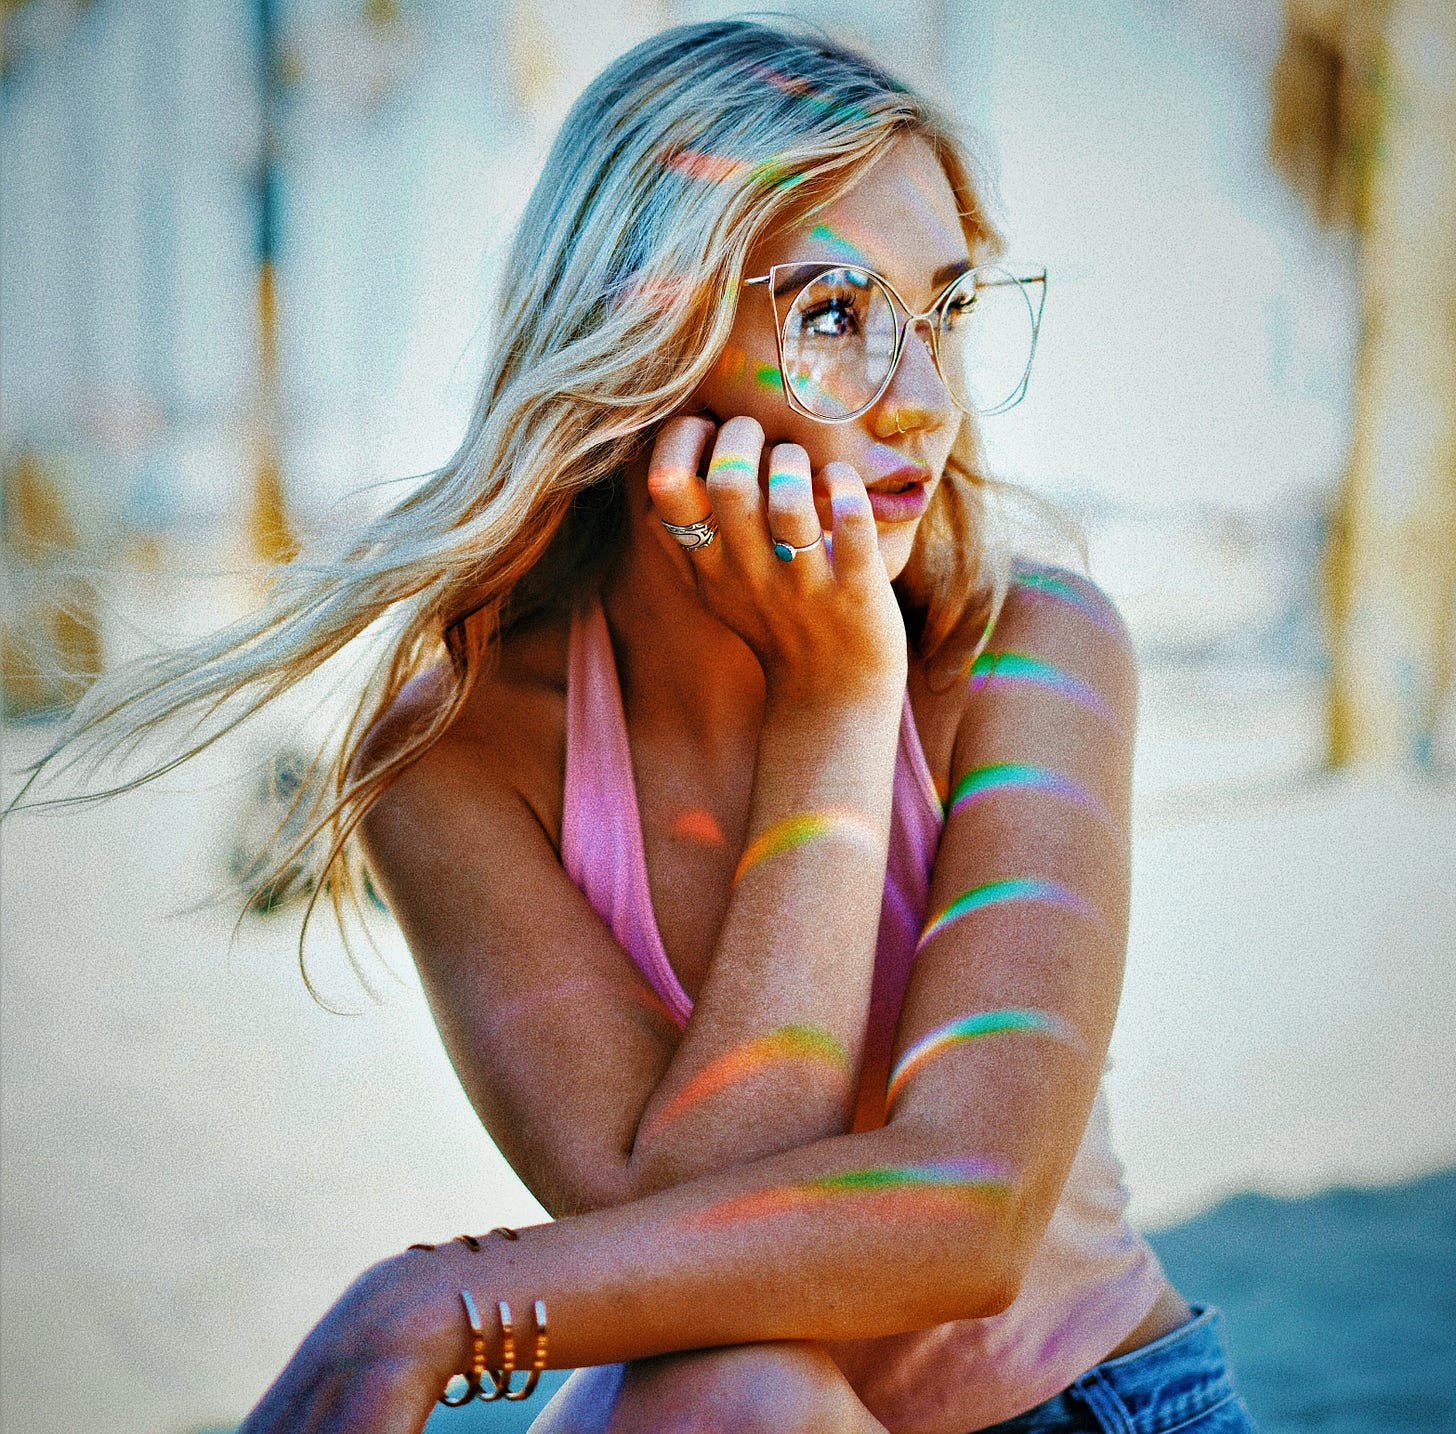 girl with blonde hair and glasses with hand on cheek colorful highlights on her arms